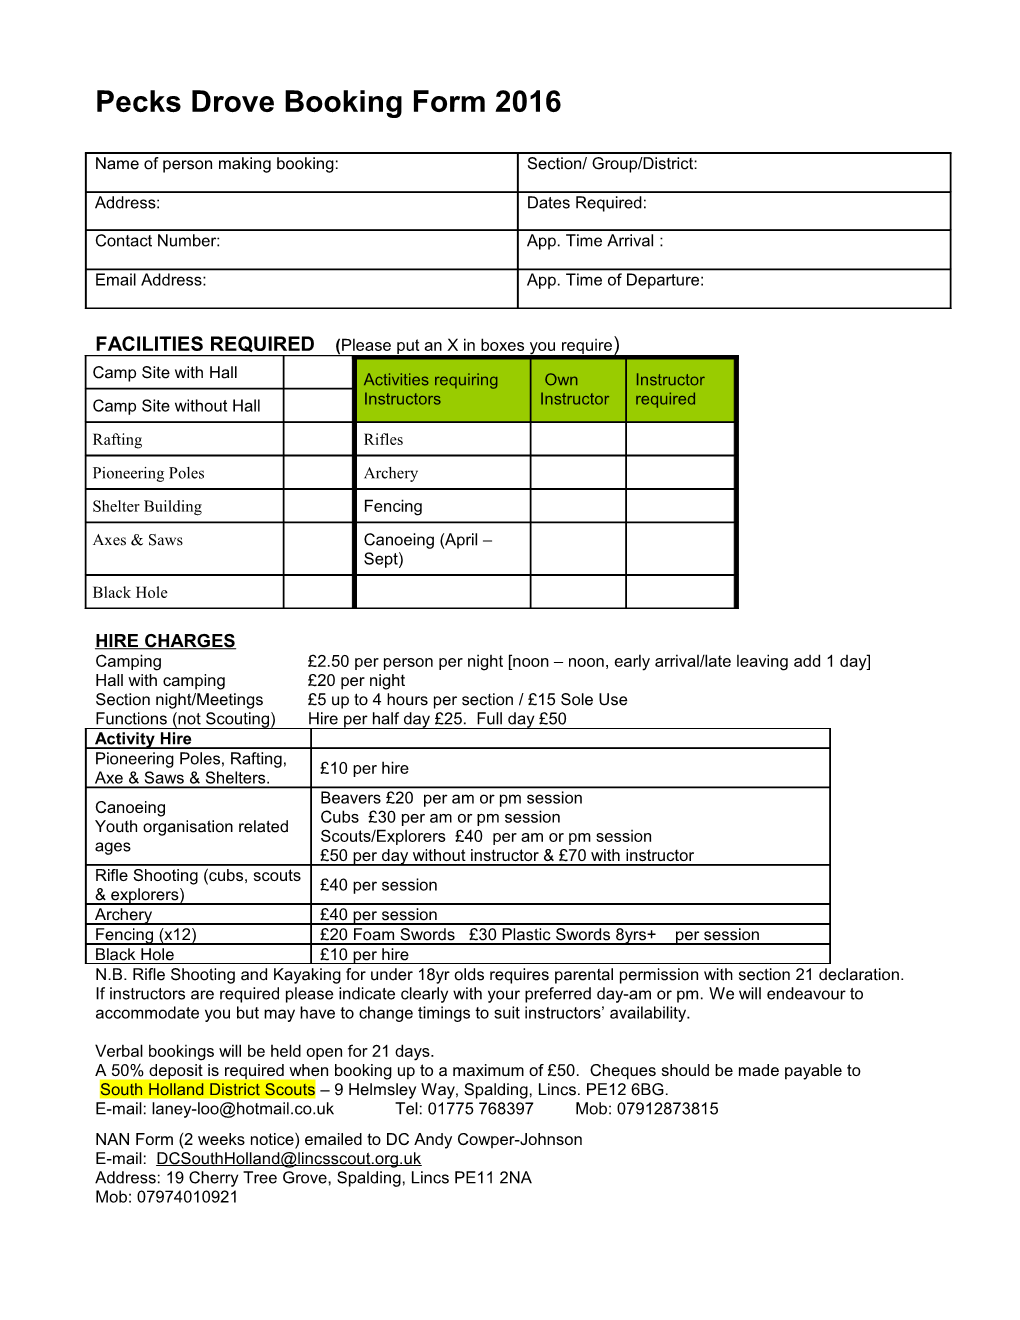 Boxford Spinney Booking Form 2014